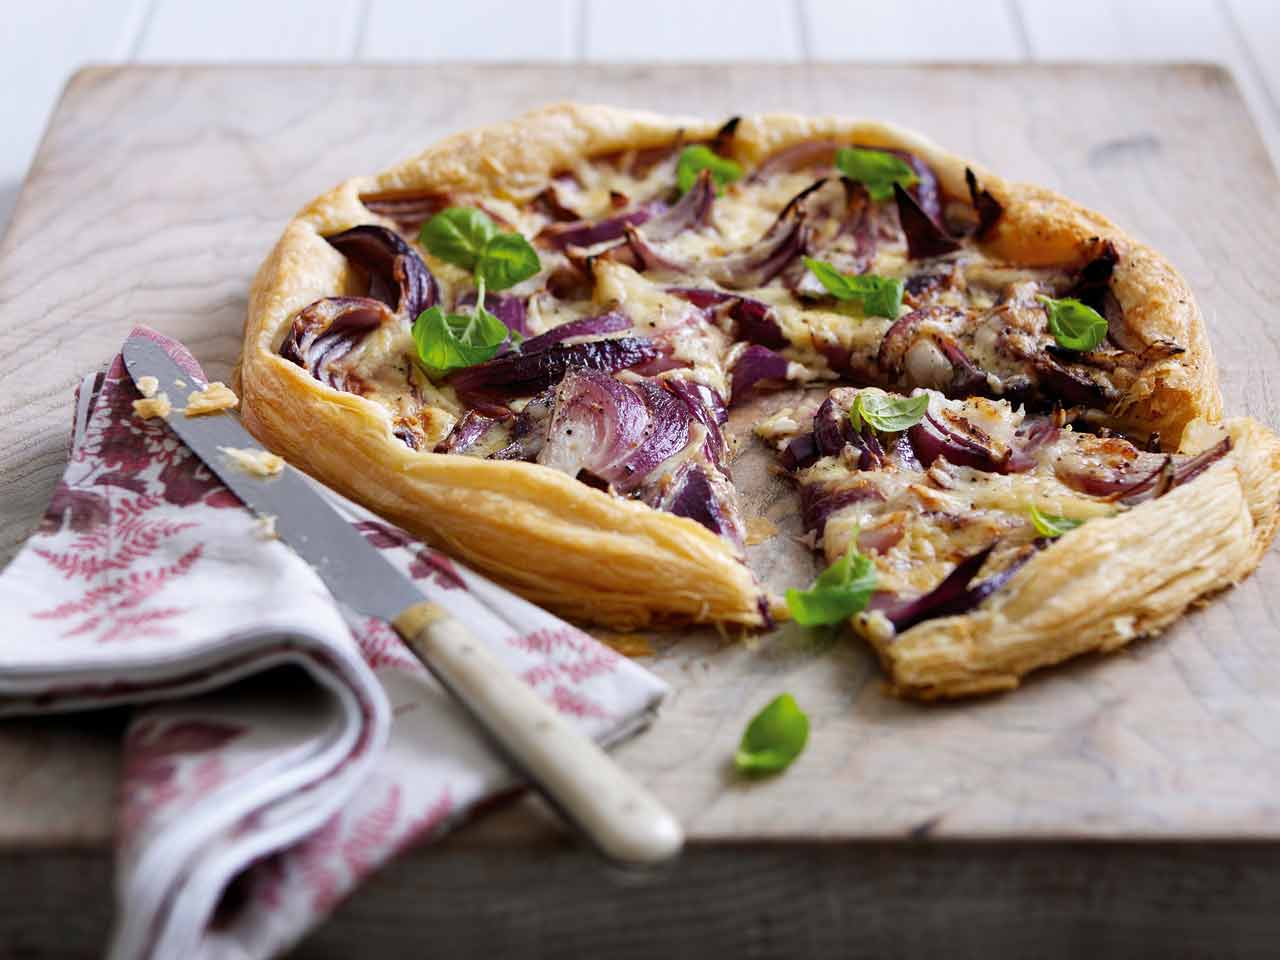 Cheddar and caramelised red onion tart